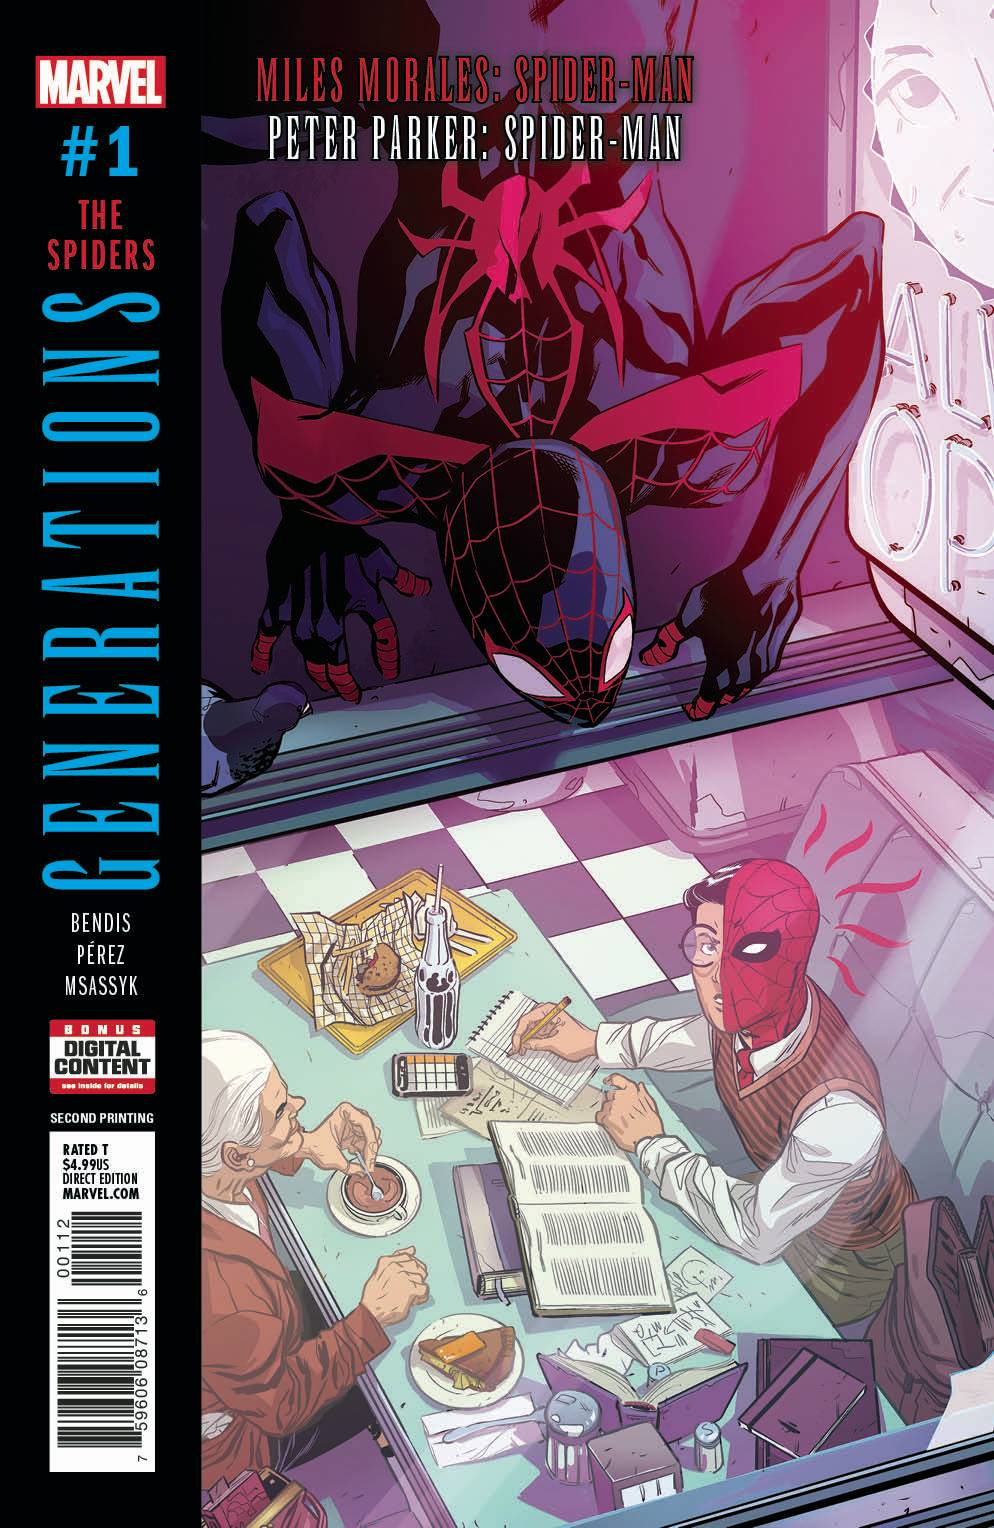 GENERATIONS: MILES MORALES SPIDER-MAN AND PETER PARKER SPIDER-MAN#1